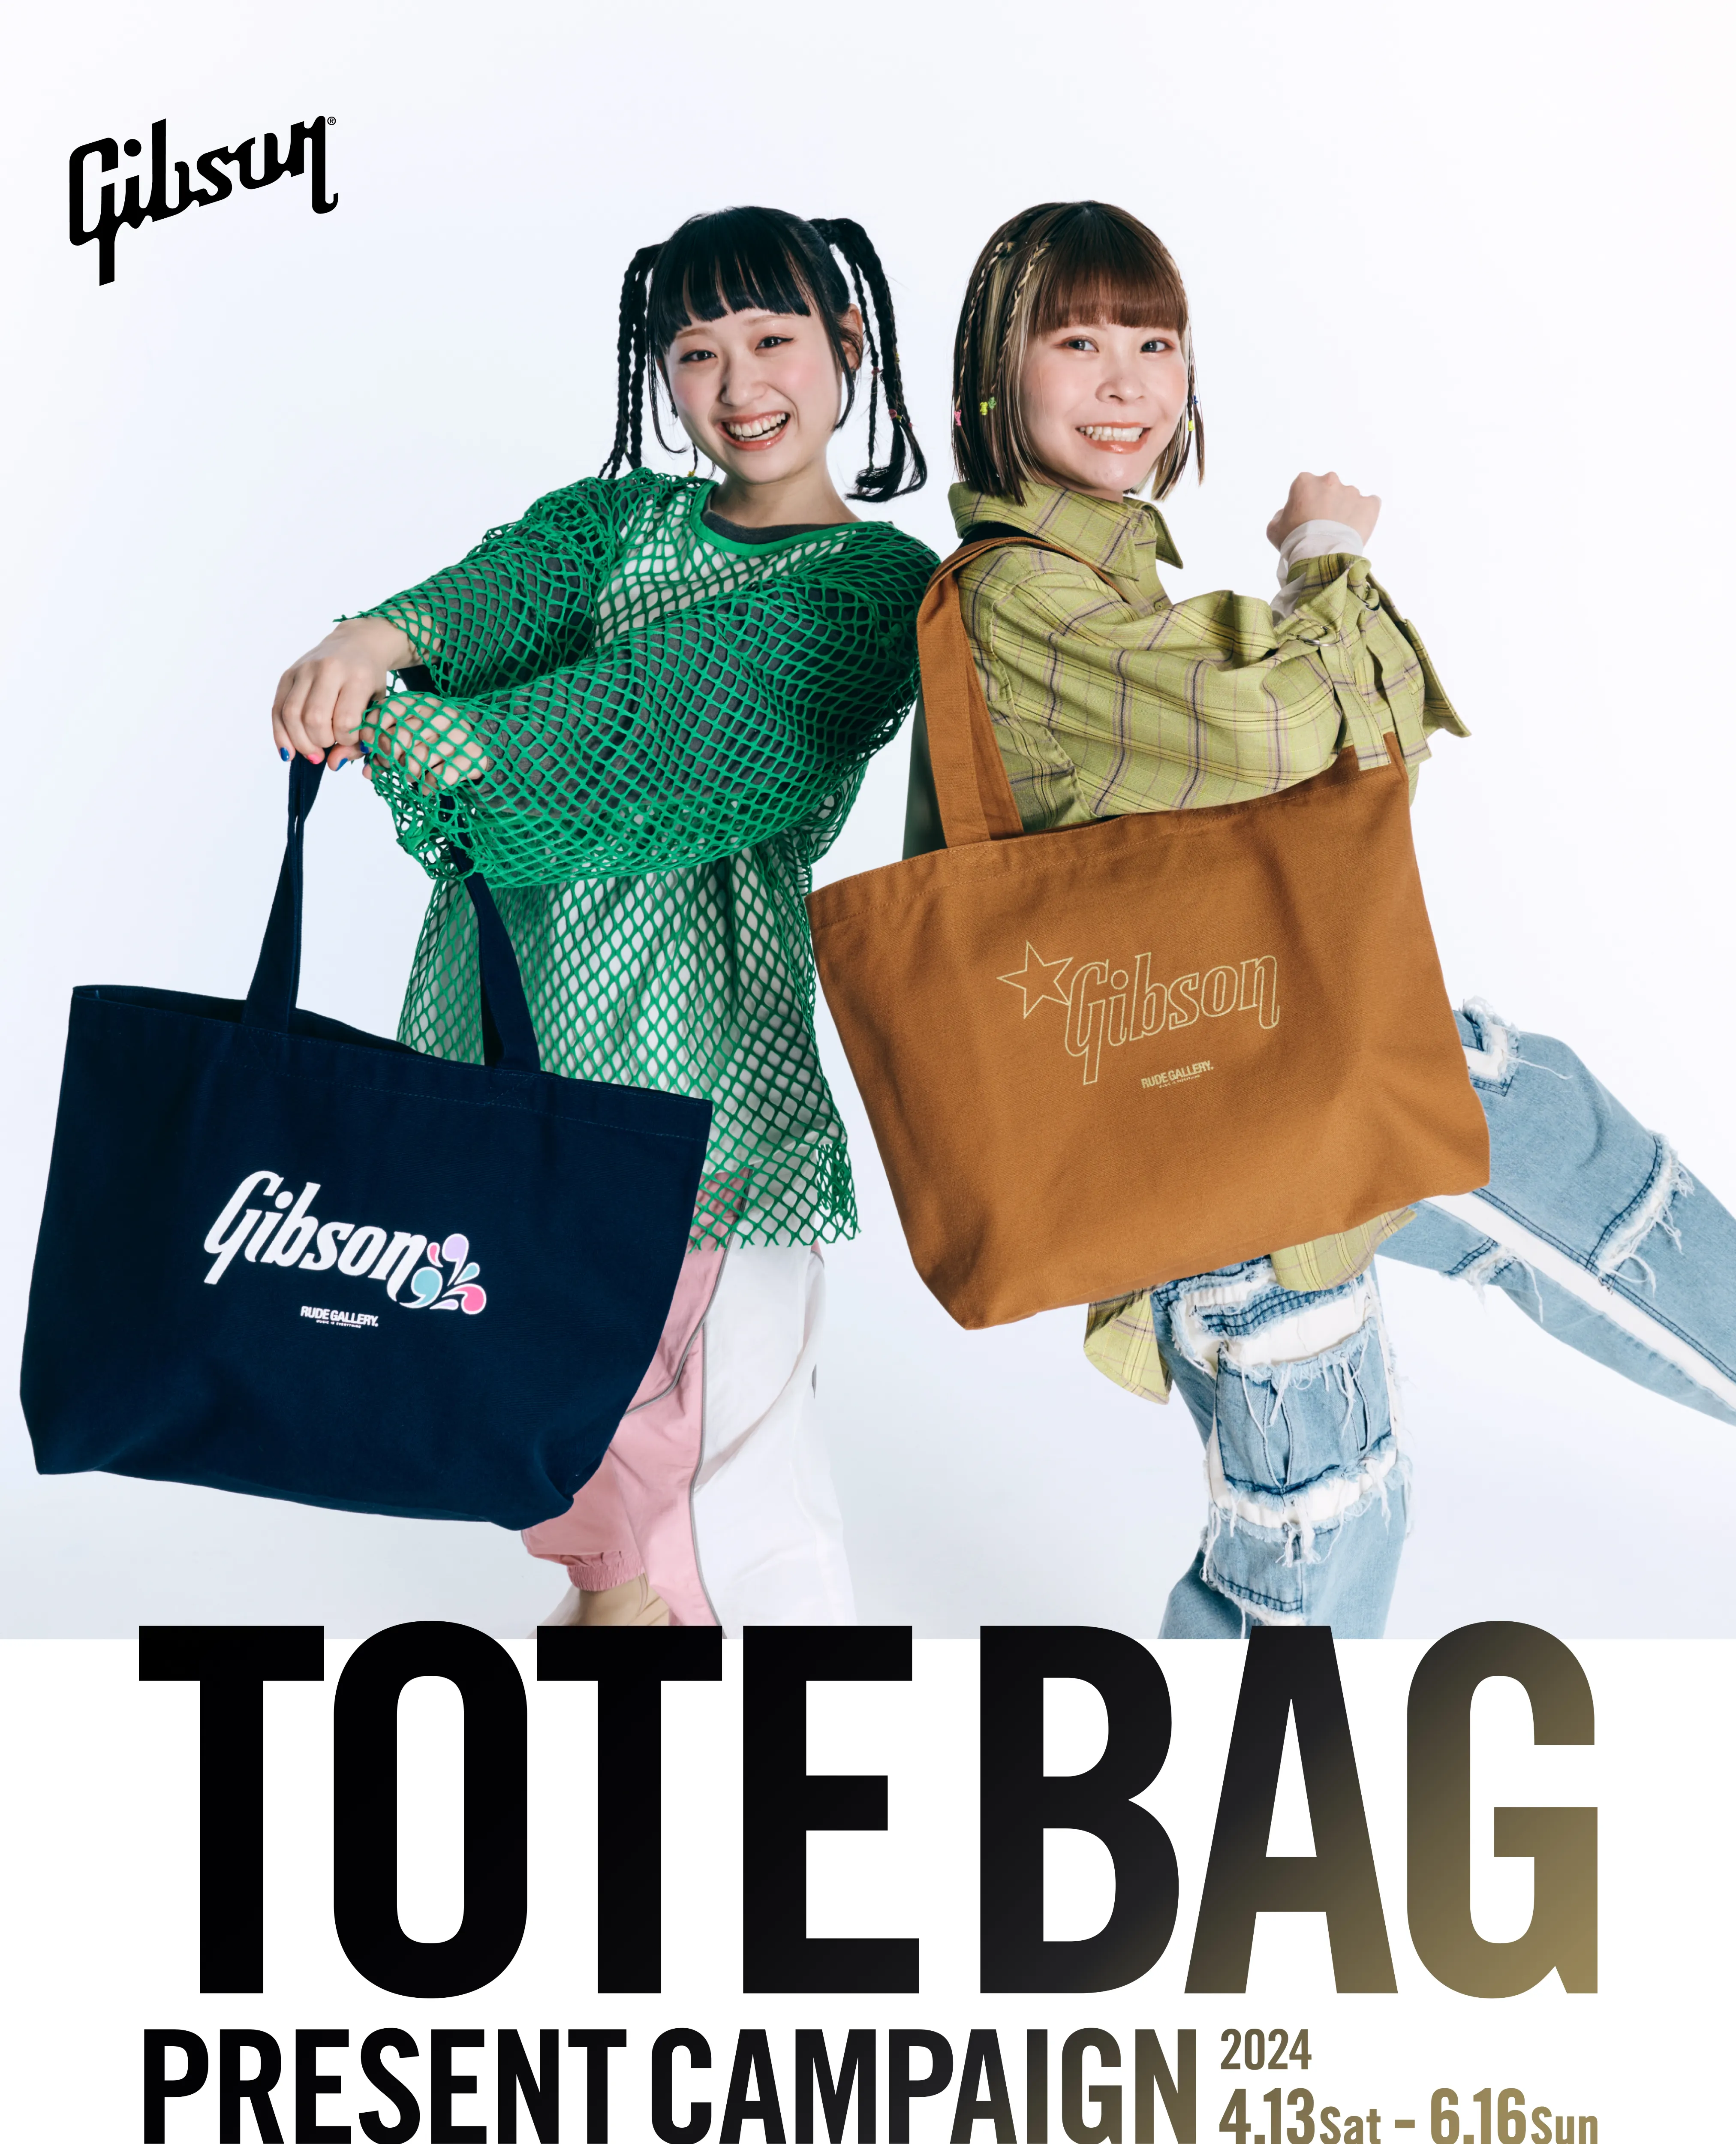 GIBSON TOTEBAG CAMPAIGN